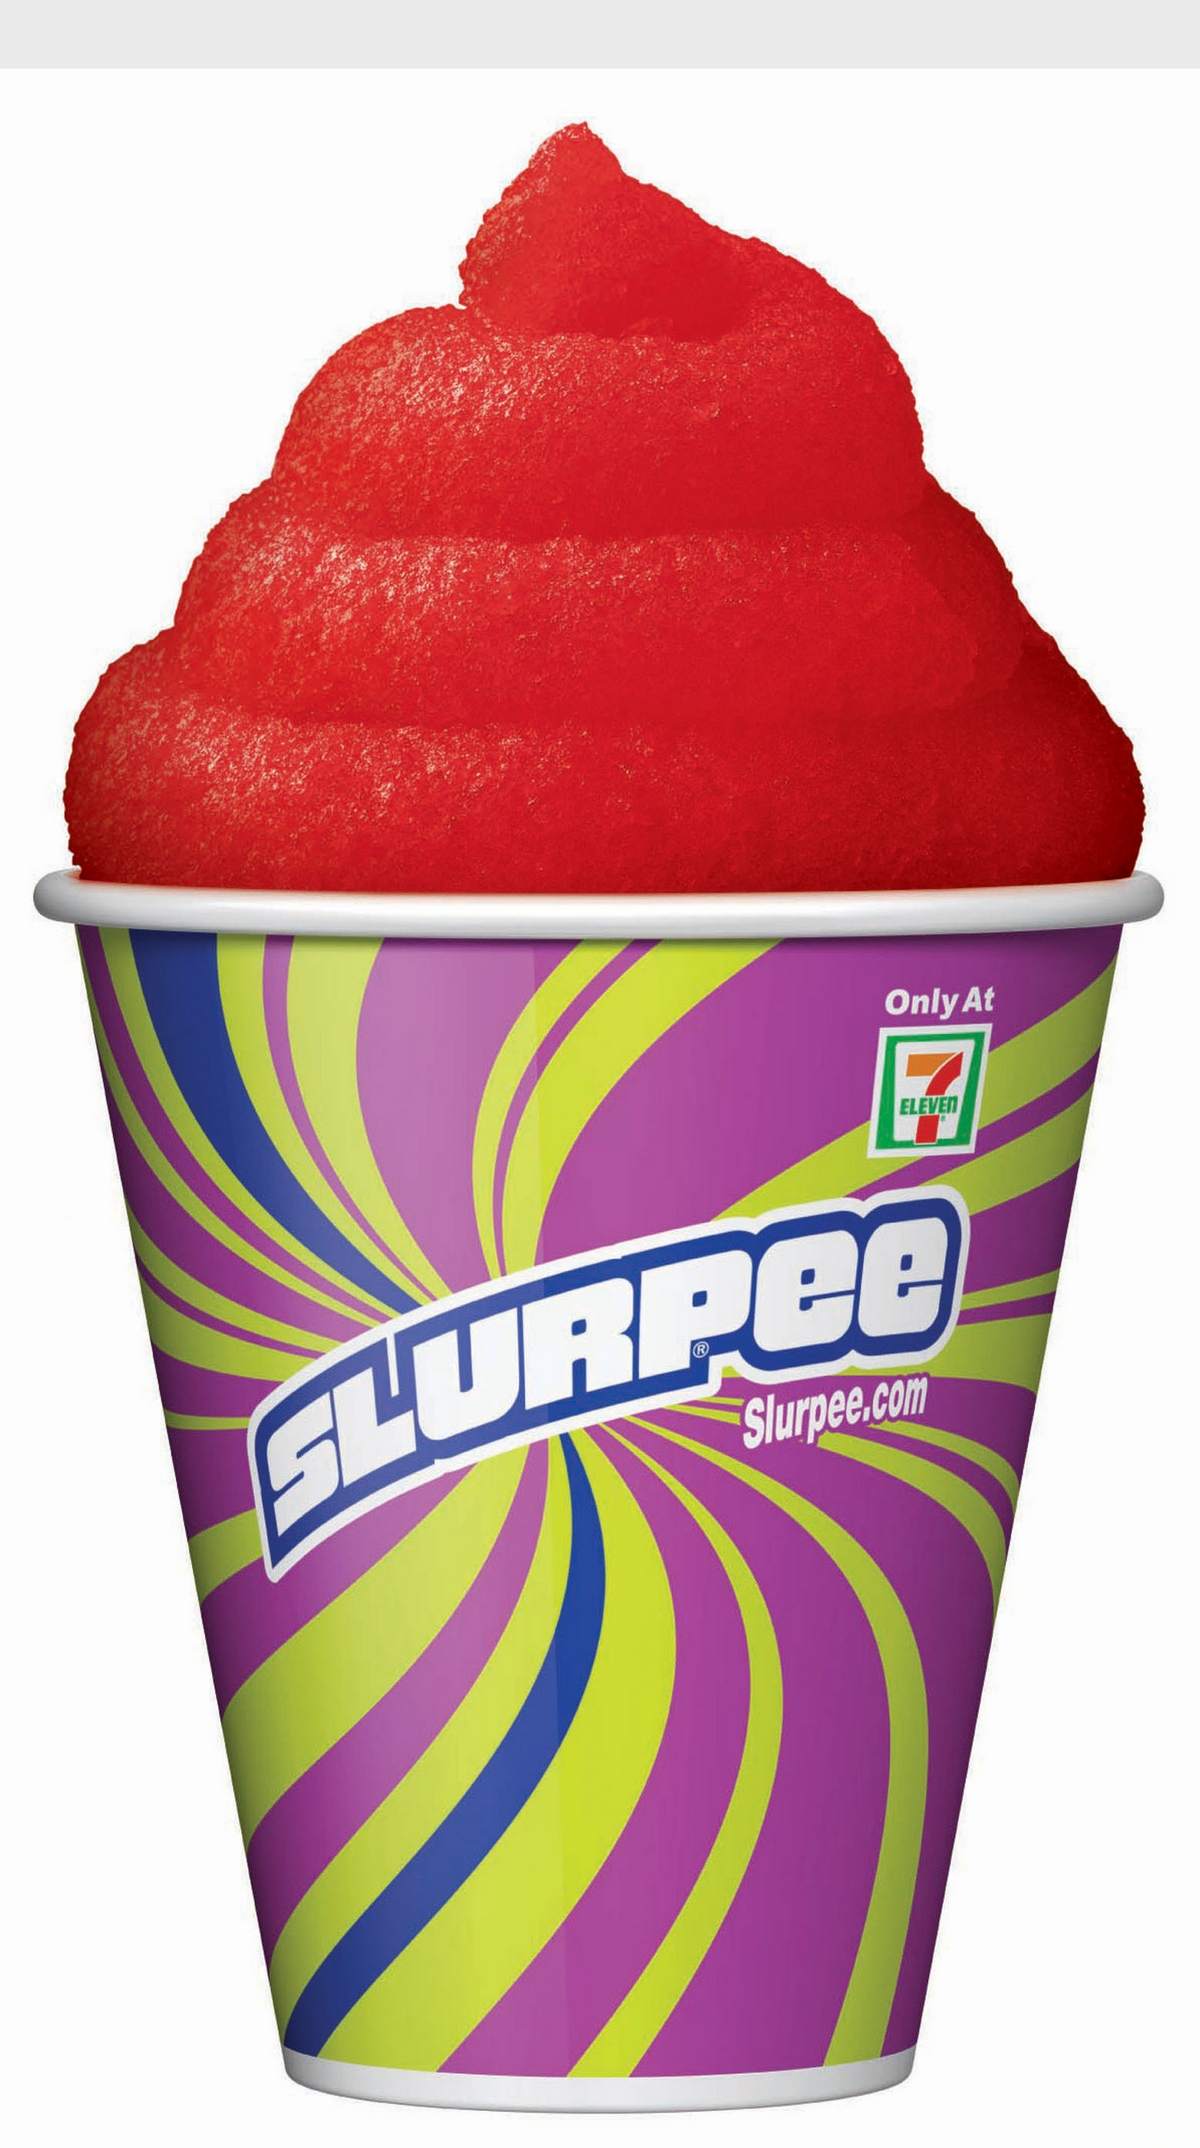 Slurpee Logo - July 11, better known as 7/11, is upon us. With it? Free slurpees again.